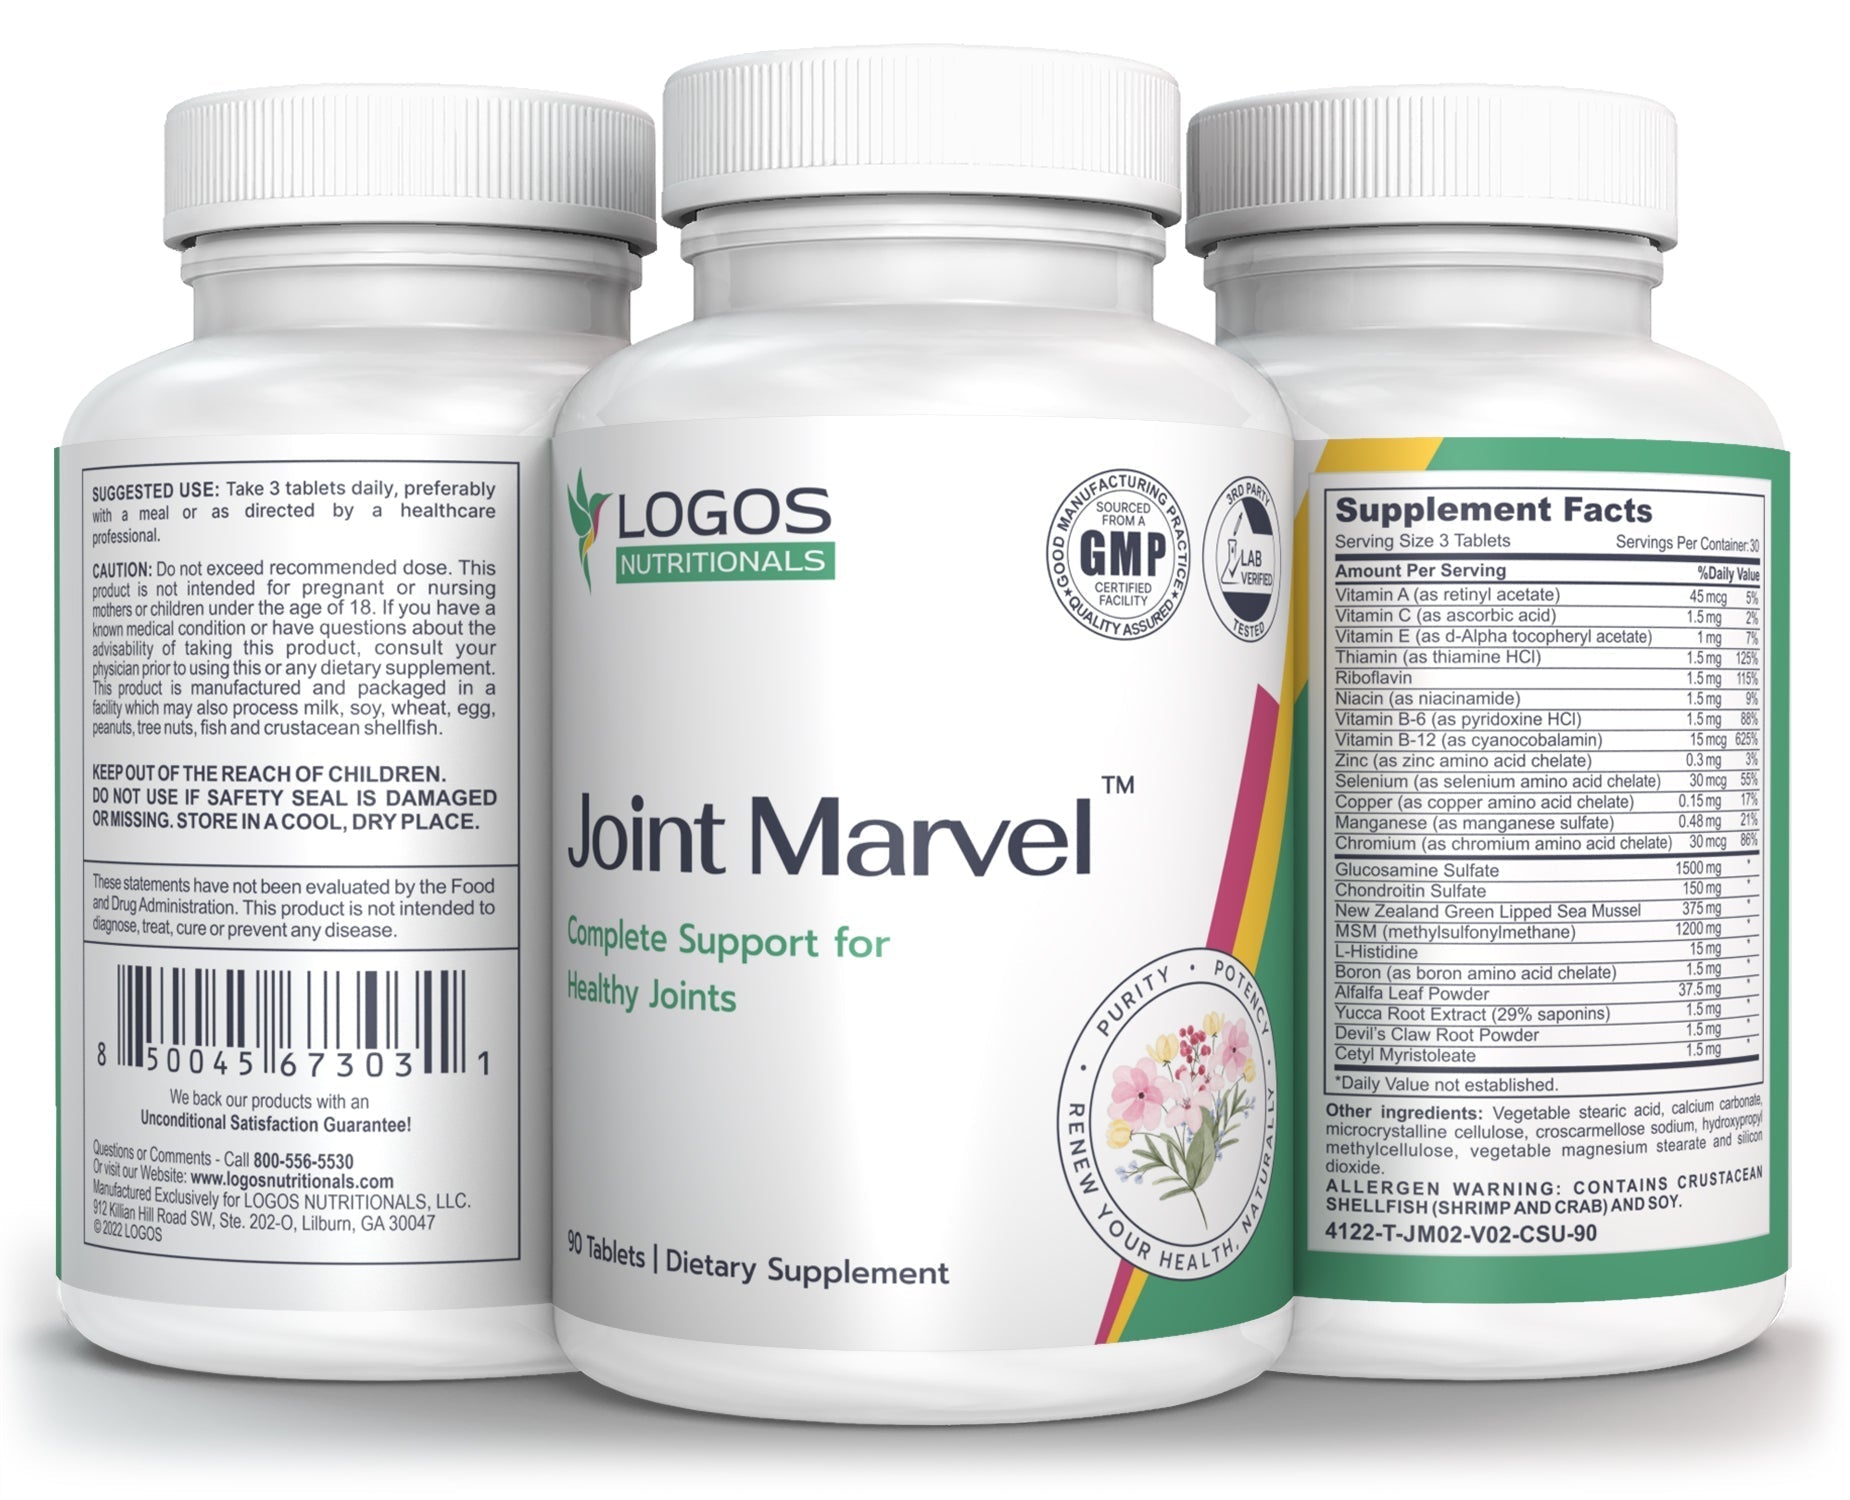 Logos Nutritionals_JOINT-MARVEL